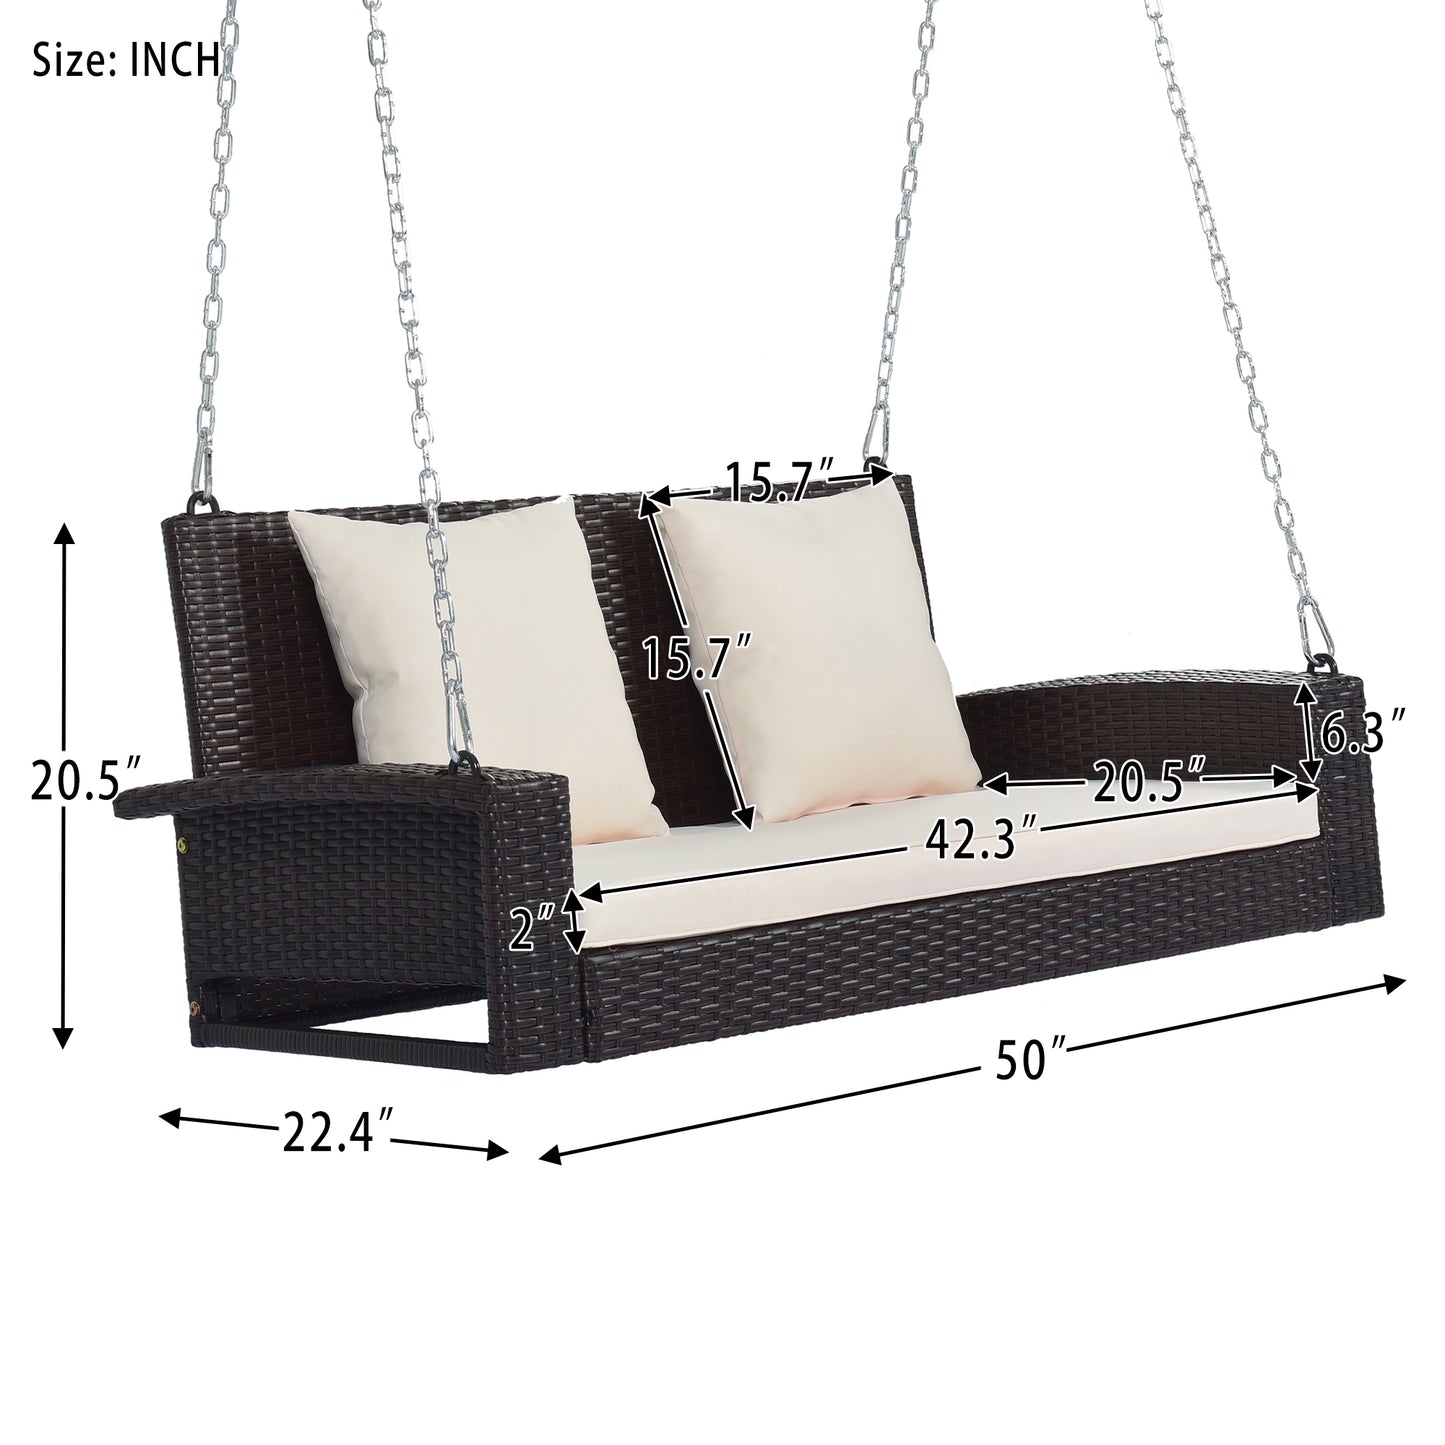 SYNGAR 2-Seat Hanging Porch Swing, Outdoor All Weather Rattan Swing Bench with Chains, Heavy Duty Hammock Bench Chair with Beige Cushions, Ideal for Backyard, Balcony, Deck, C30